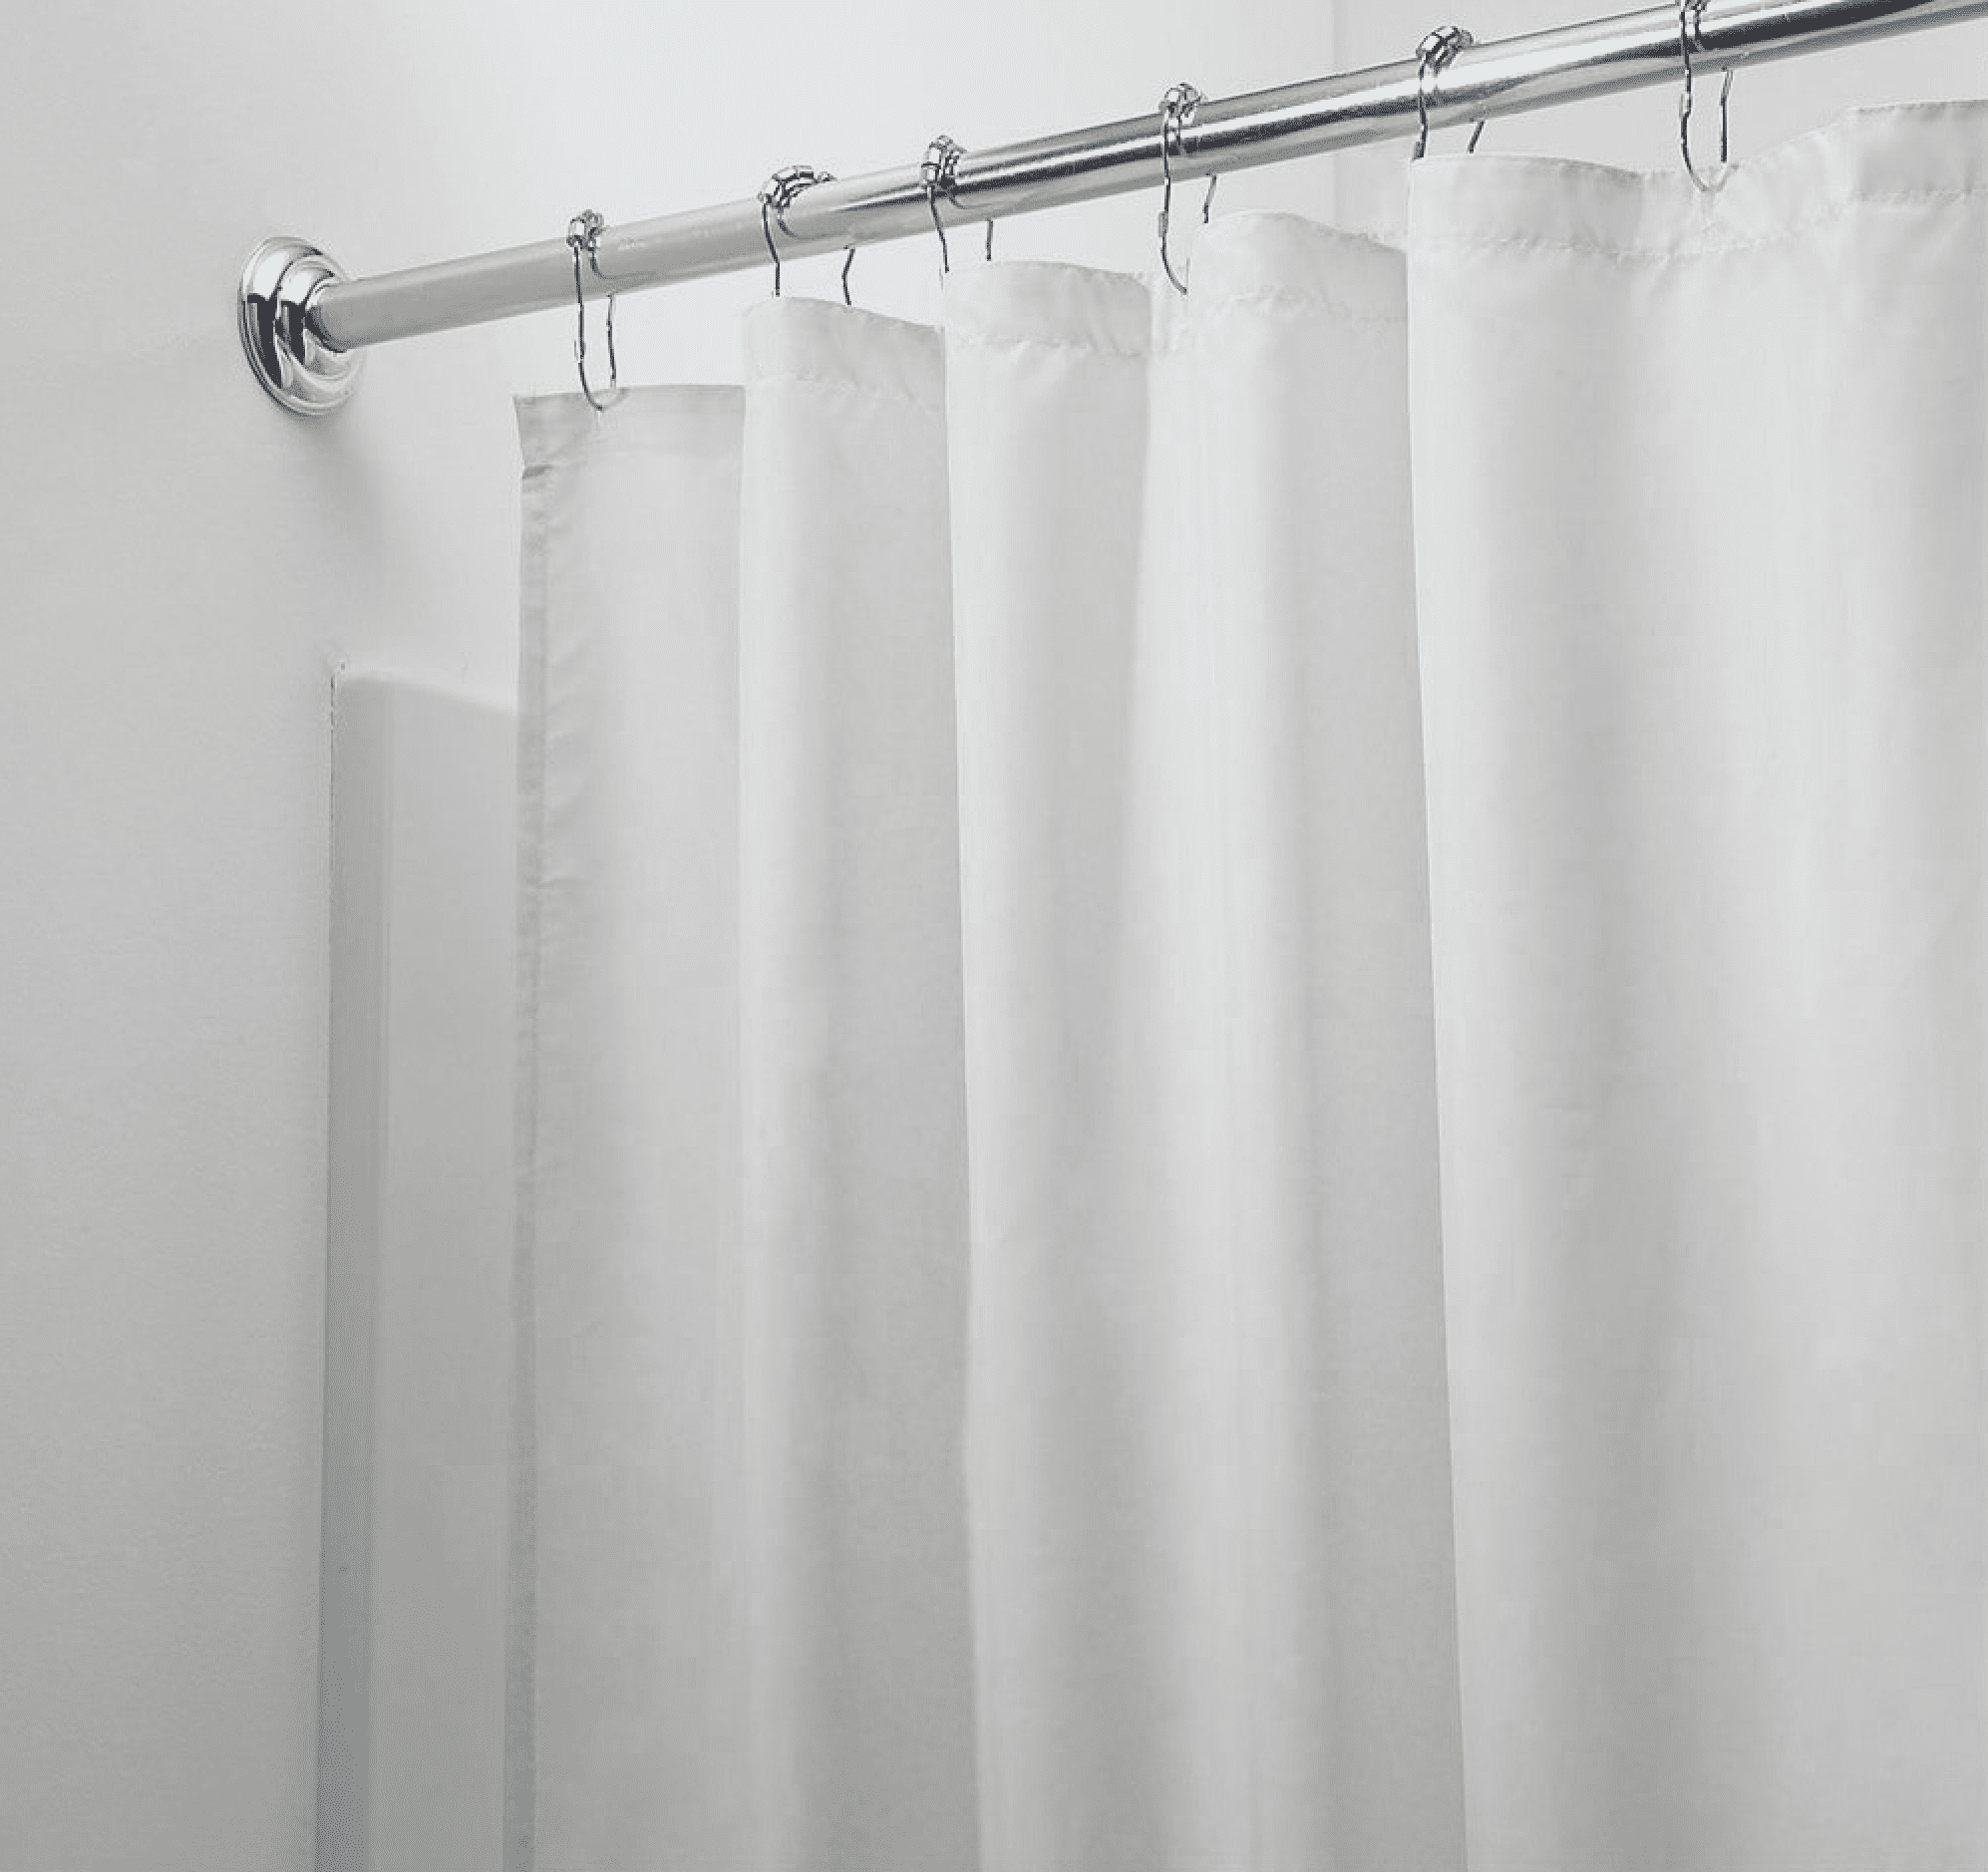 Magnetic Shower Curtain Liner Com, Magnetic Shower Curtain Weights